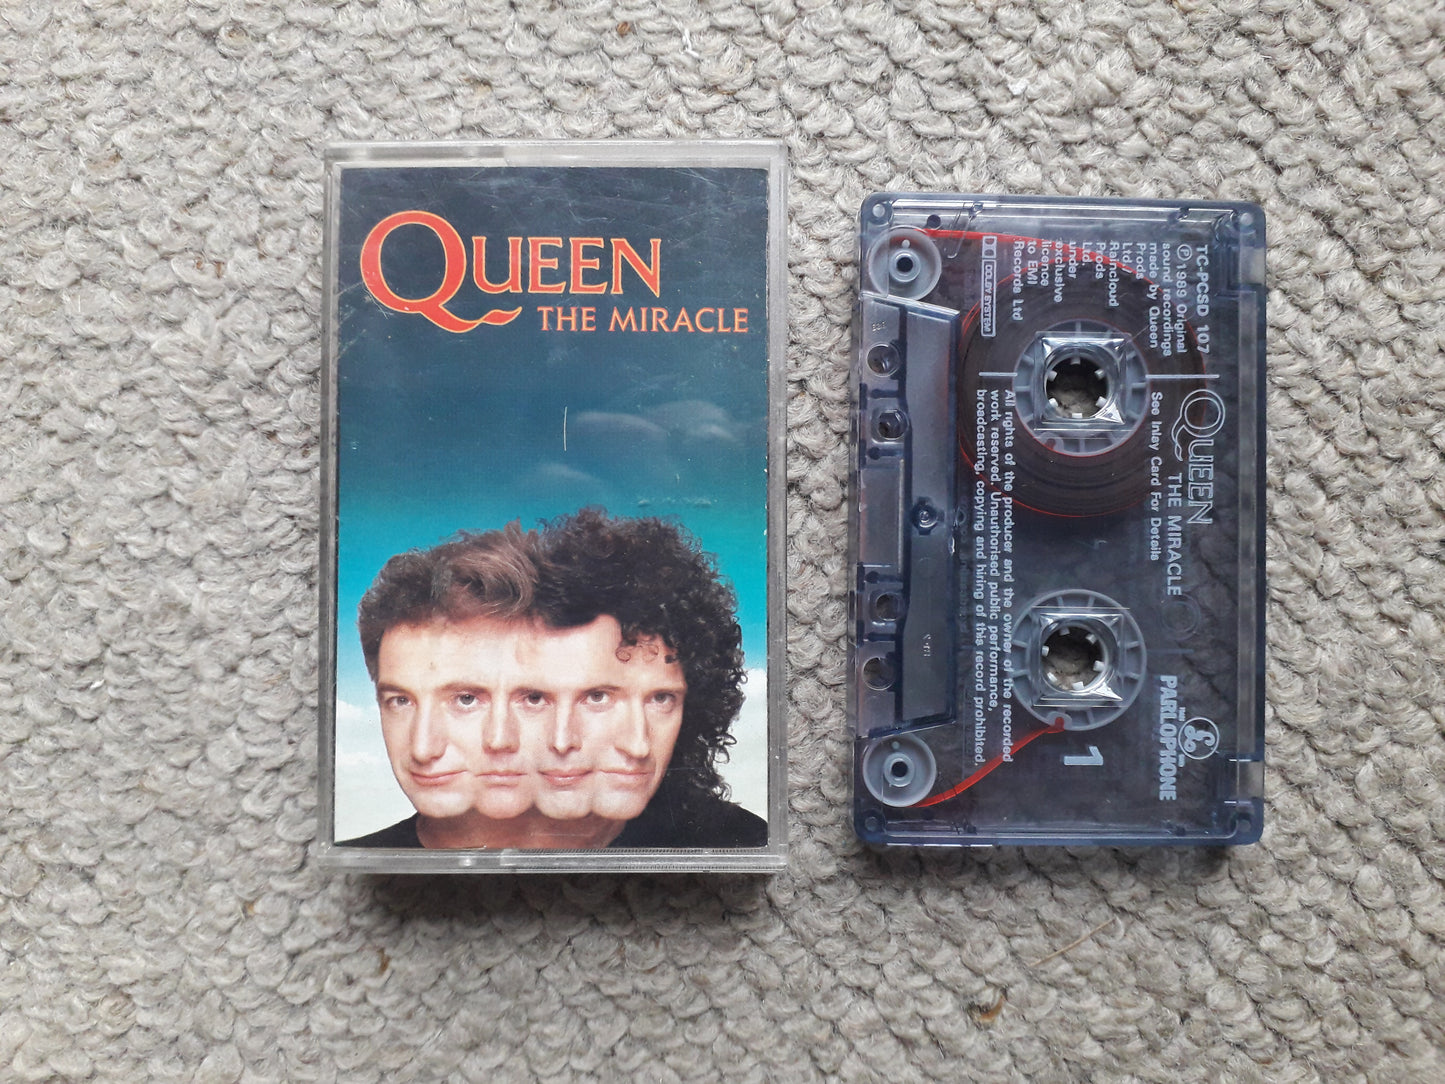 Queen-The Miracle Cassette ((TCPCSD 107)